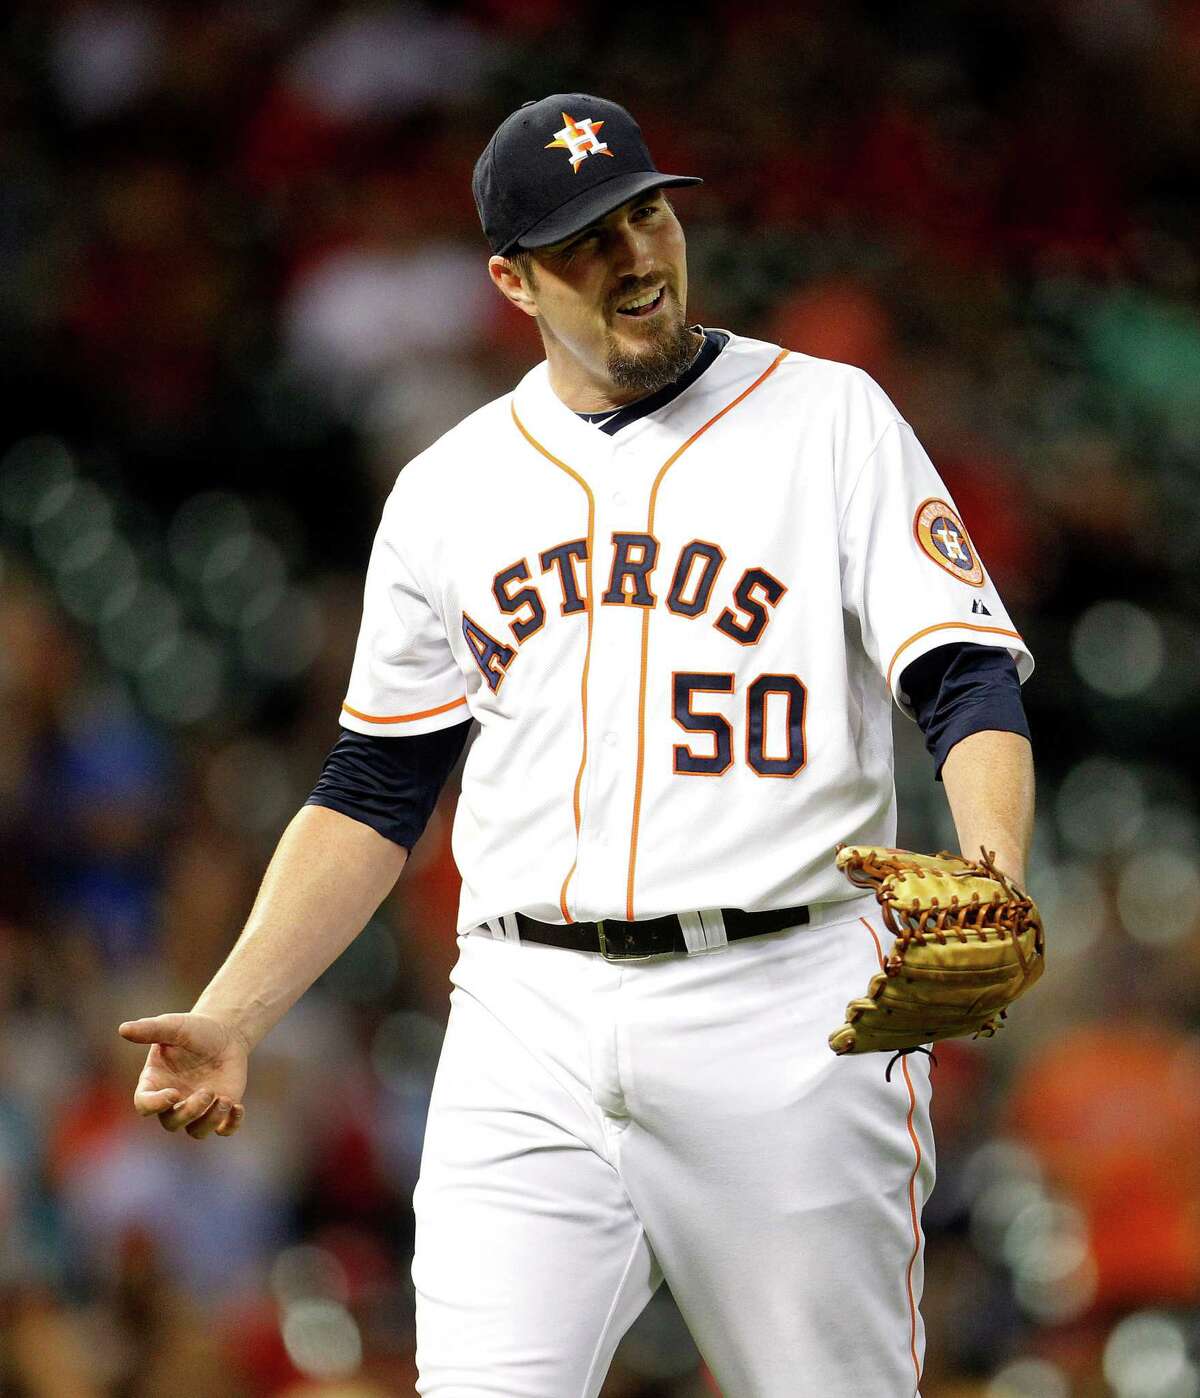 Veteran reliever Chad Qualls is pulling double duty as pitcher and mentor as the Astros' bullpen struggles this season.